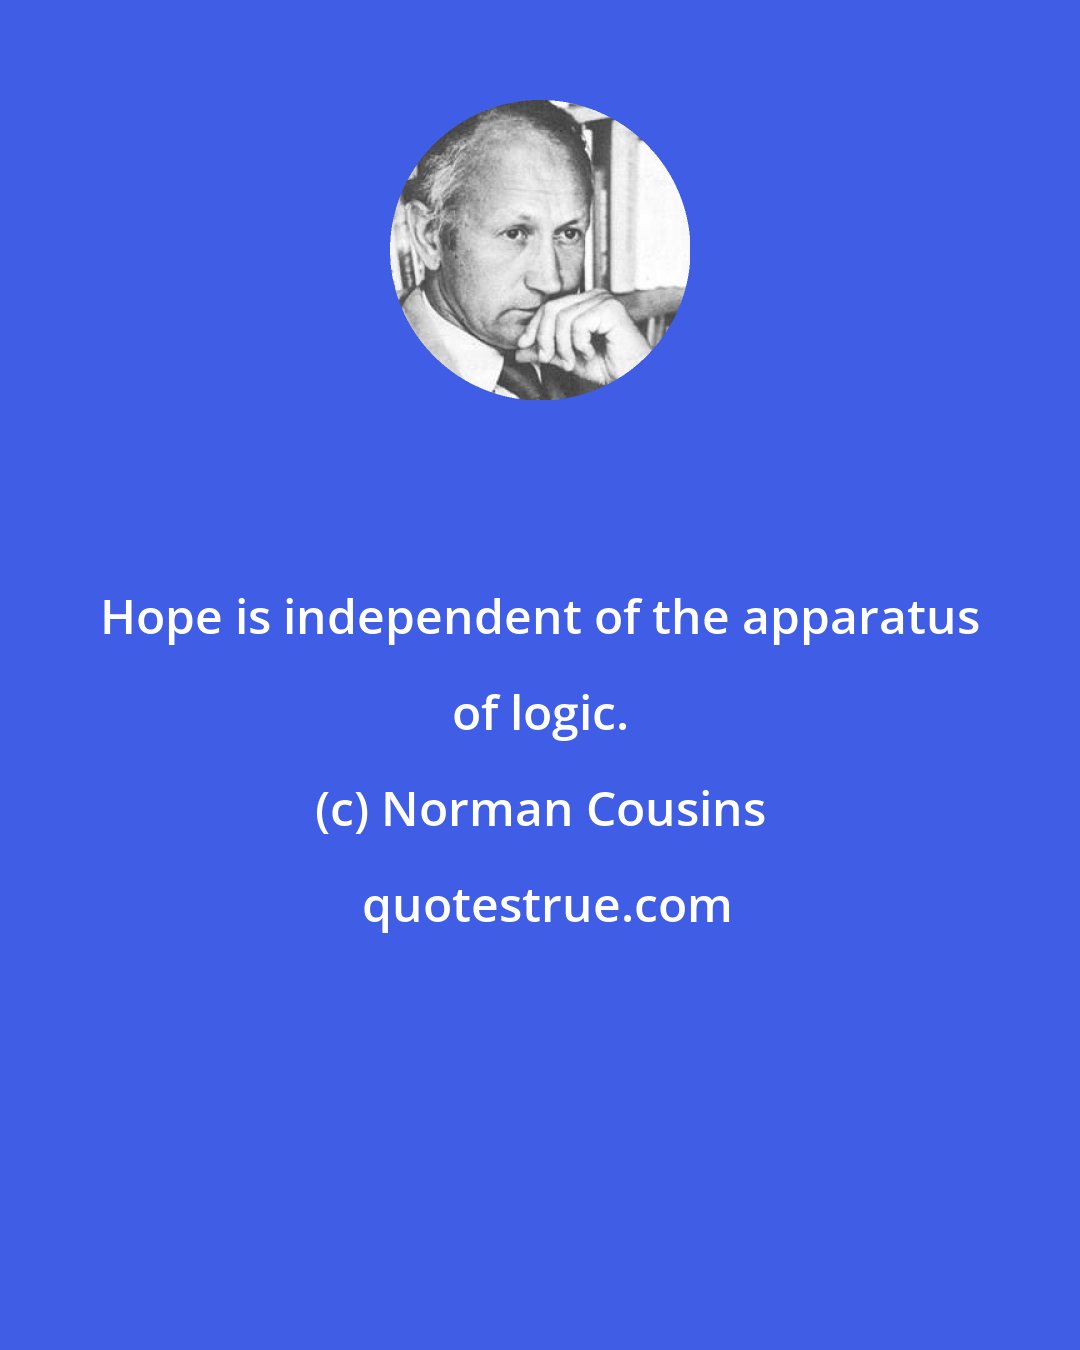 Norman Cousins: Hope is independent of the apparatus of logic.